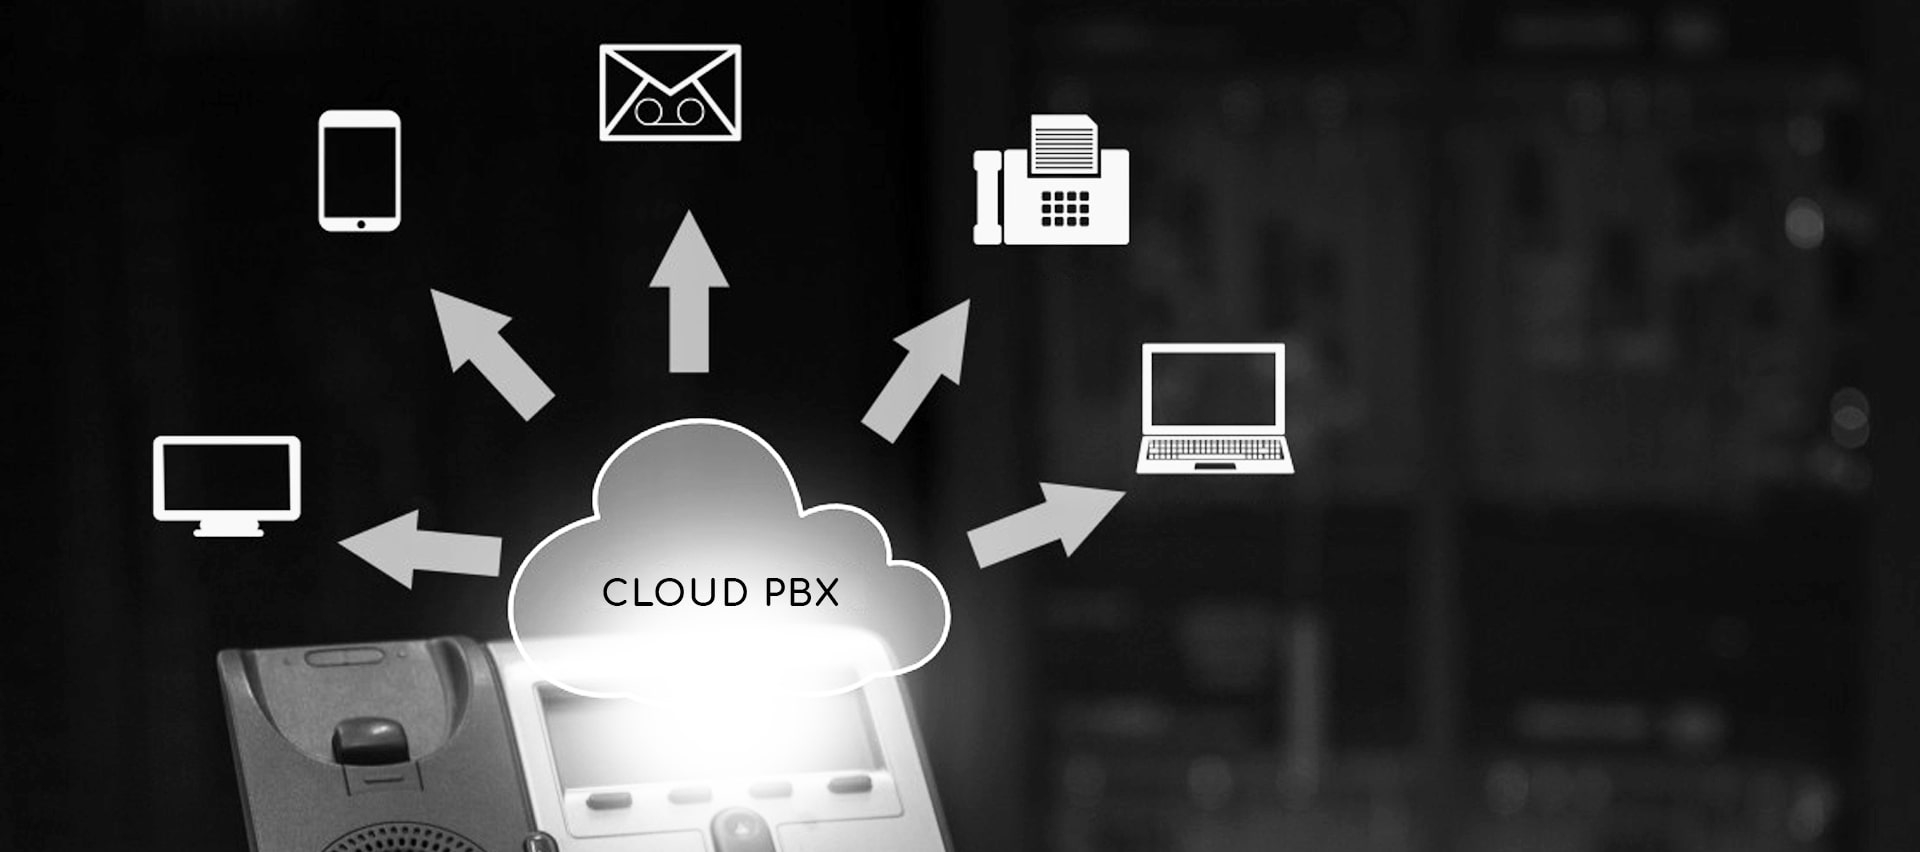 "PBX" written in a cloud pointing multiple pictogram devices